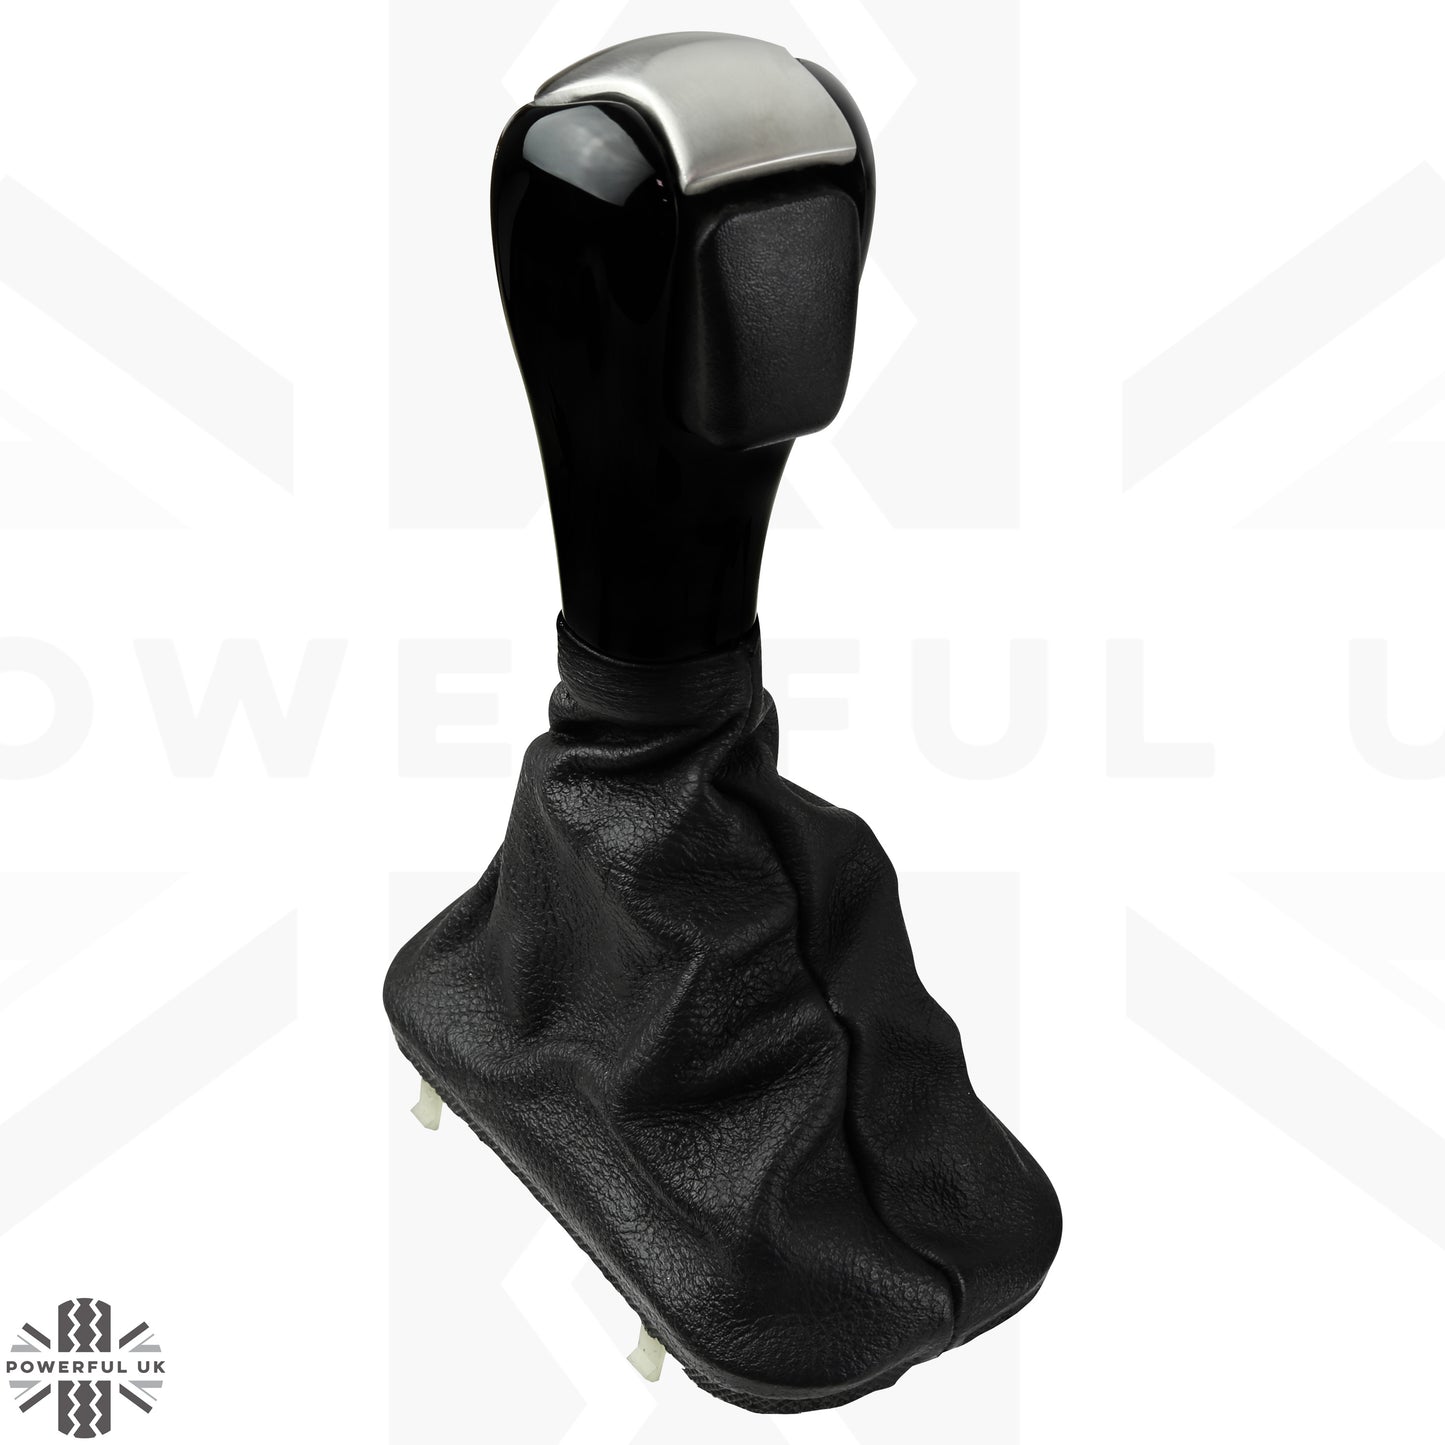 Gear Knob - Black Piano + Brushed Metal Insert for Range Rover L322